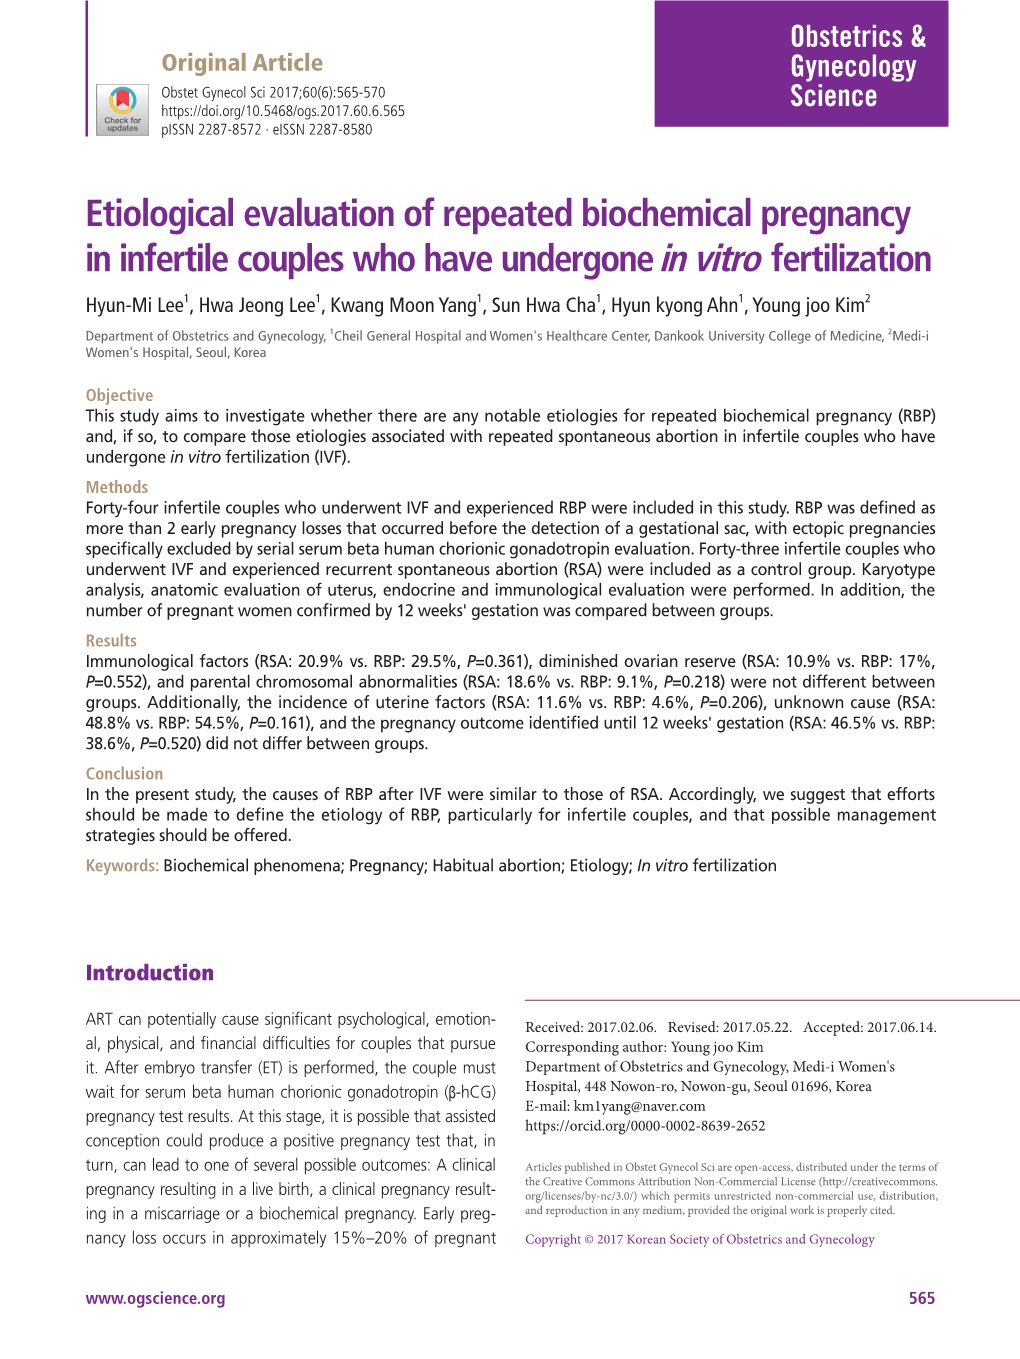 Etiological Evaluation of Repeated Biochemical Pregnancy in Infertile